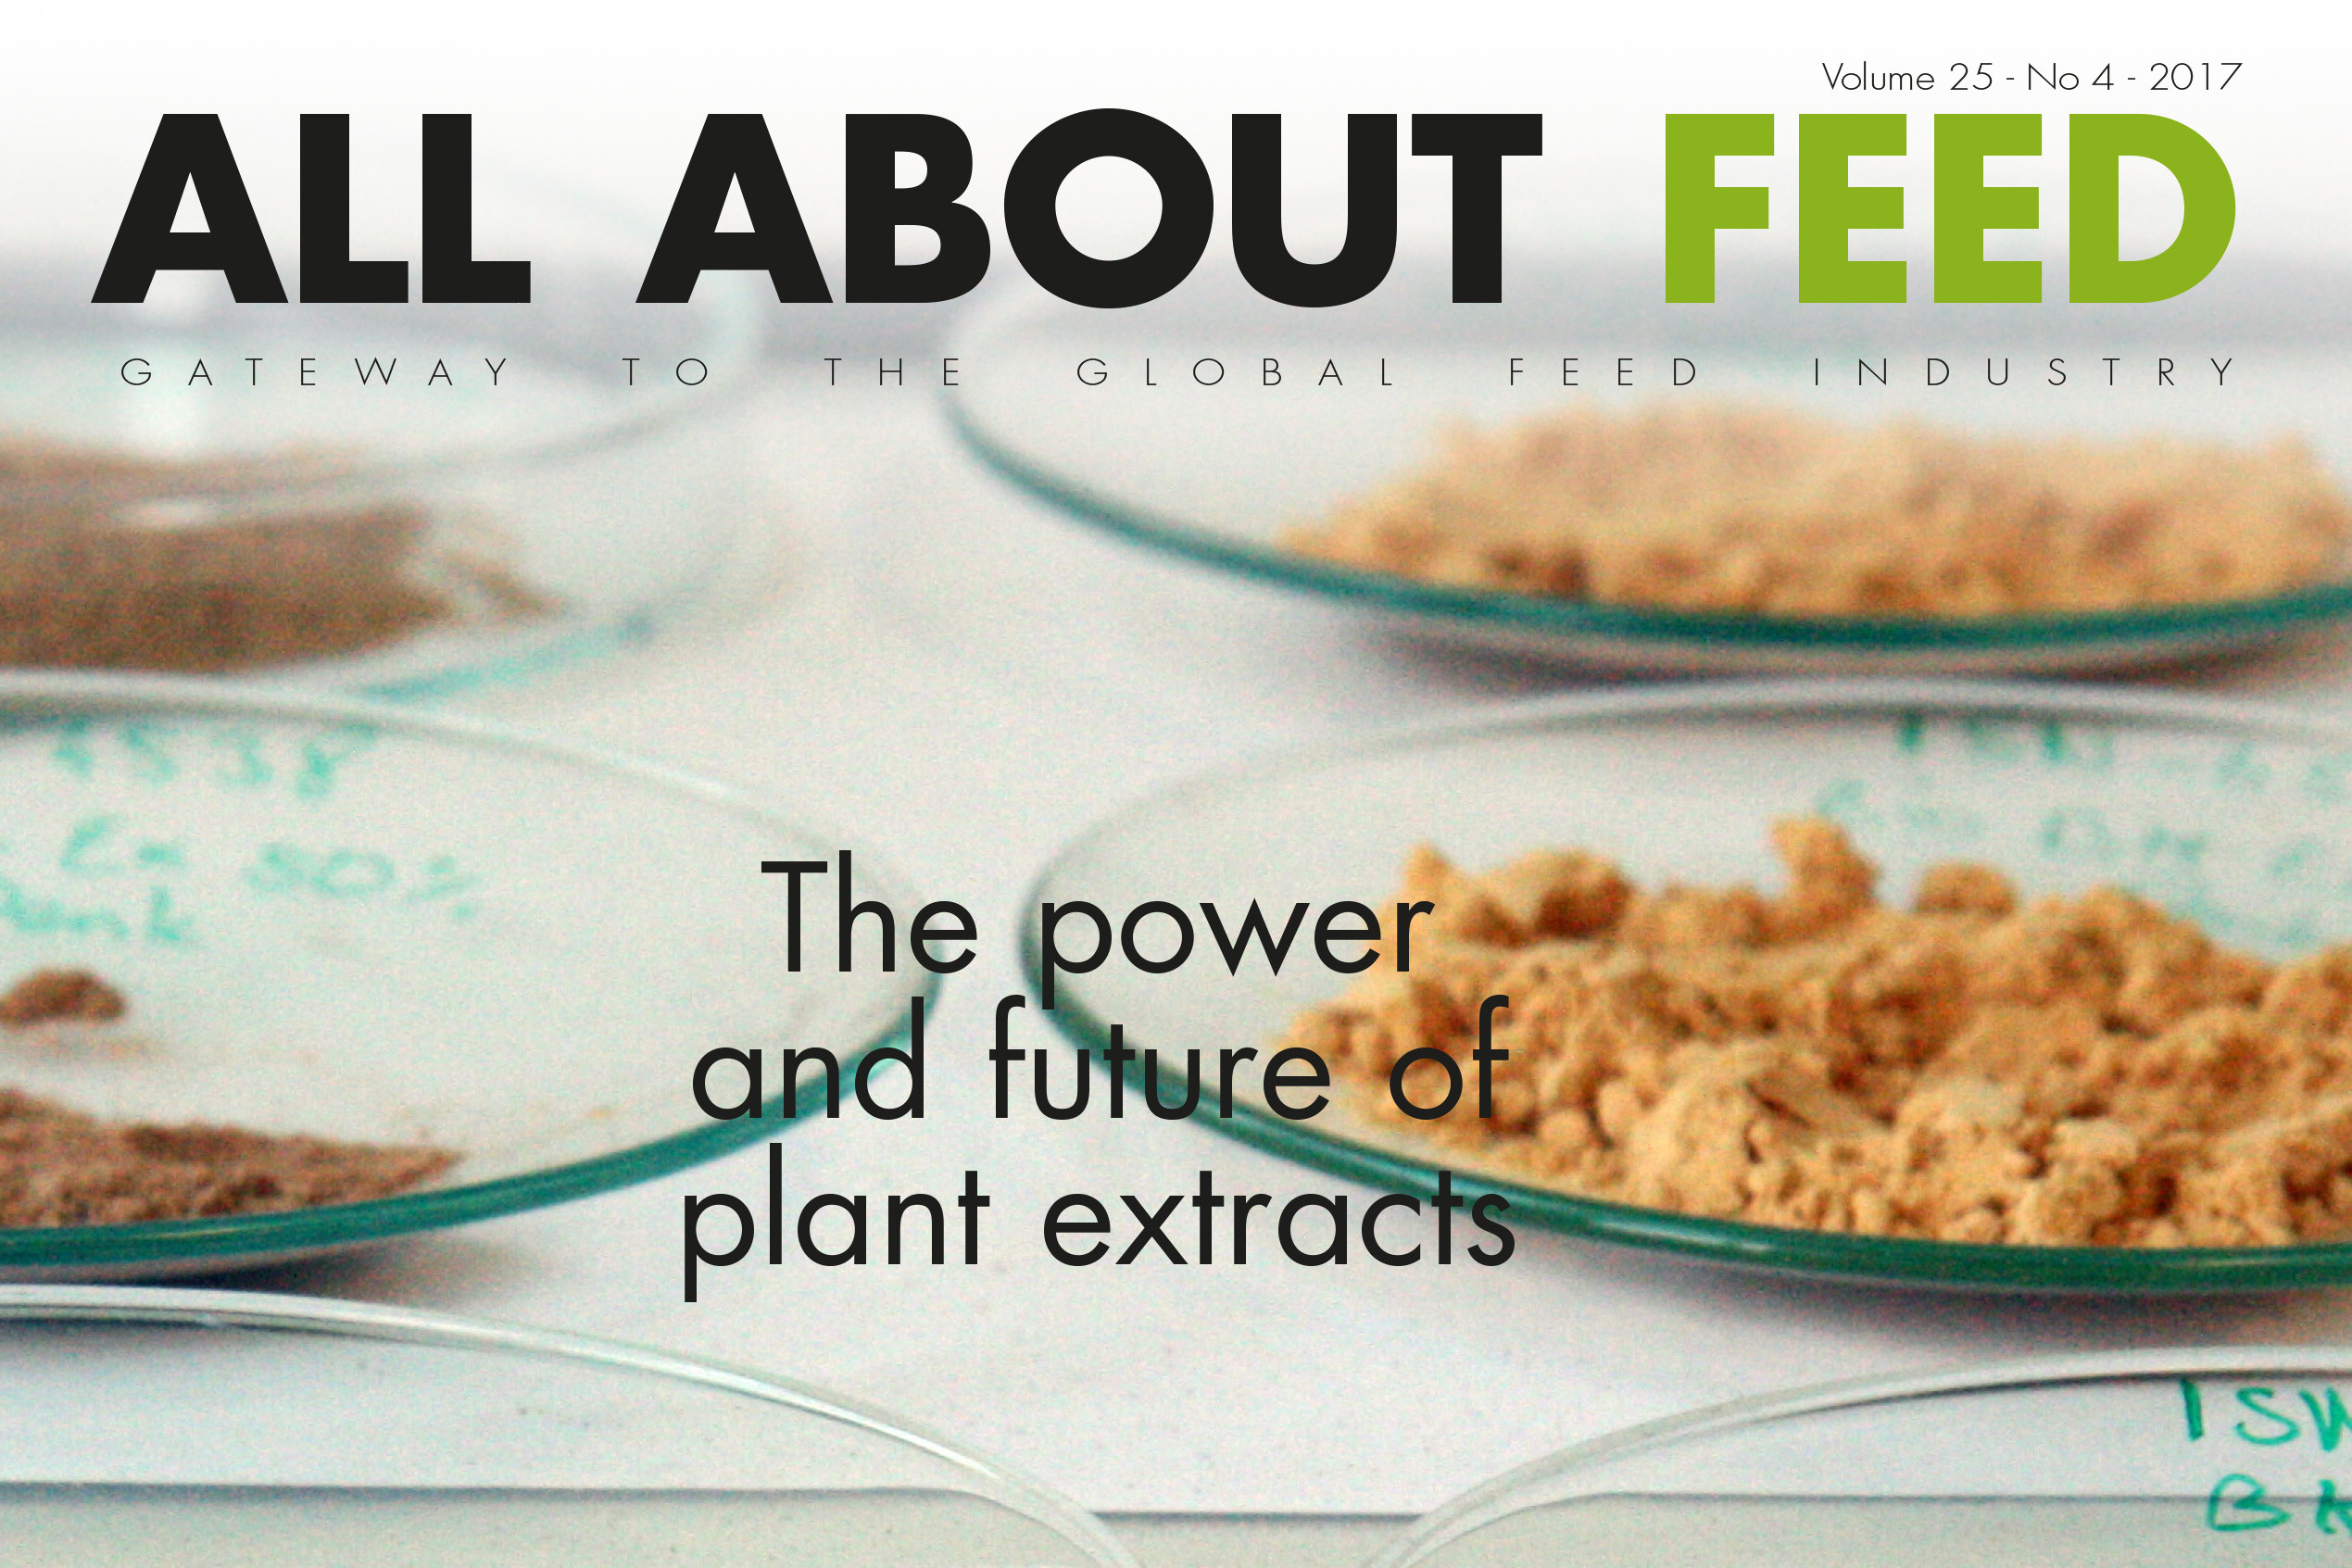 All About Feed issue 4 now available online